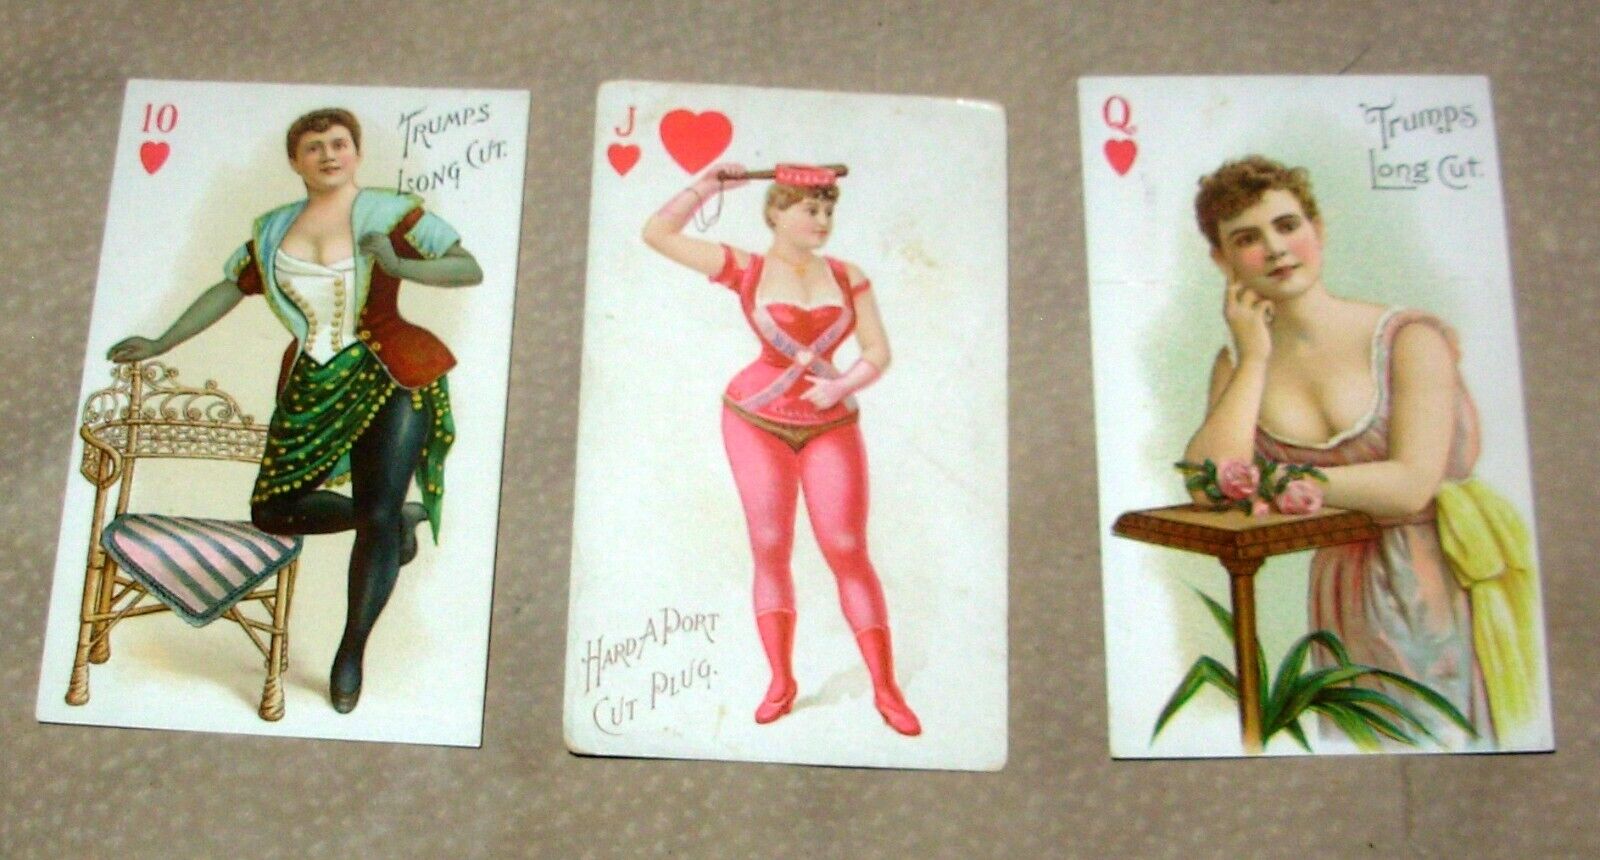 3 Sexy Antique Tobacco Cards-Sexy Hard A Port Poker-Victorian